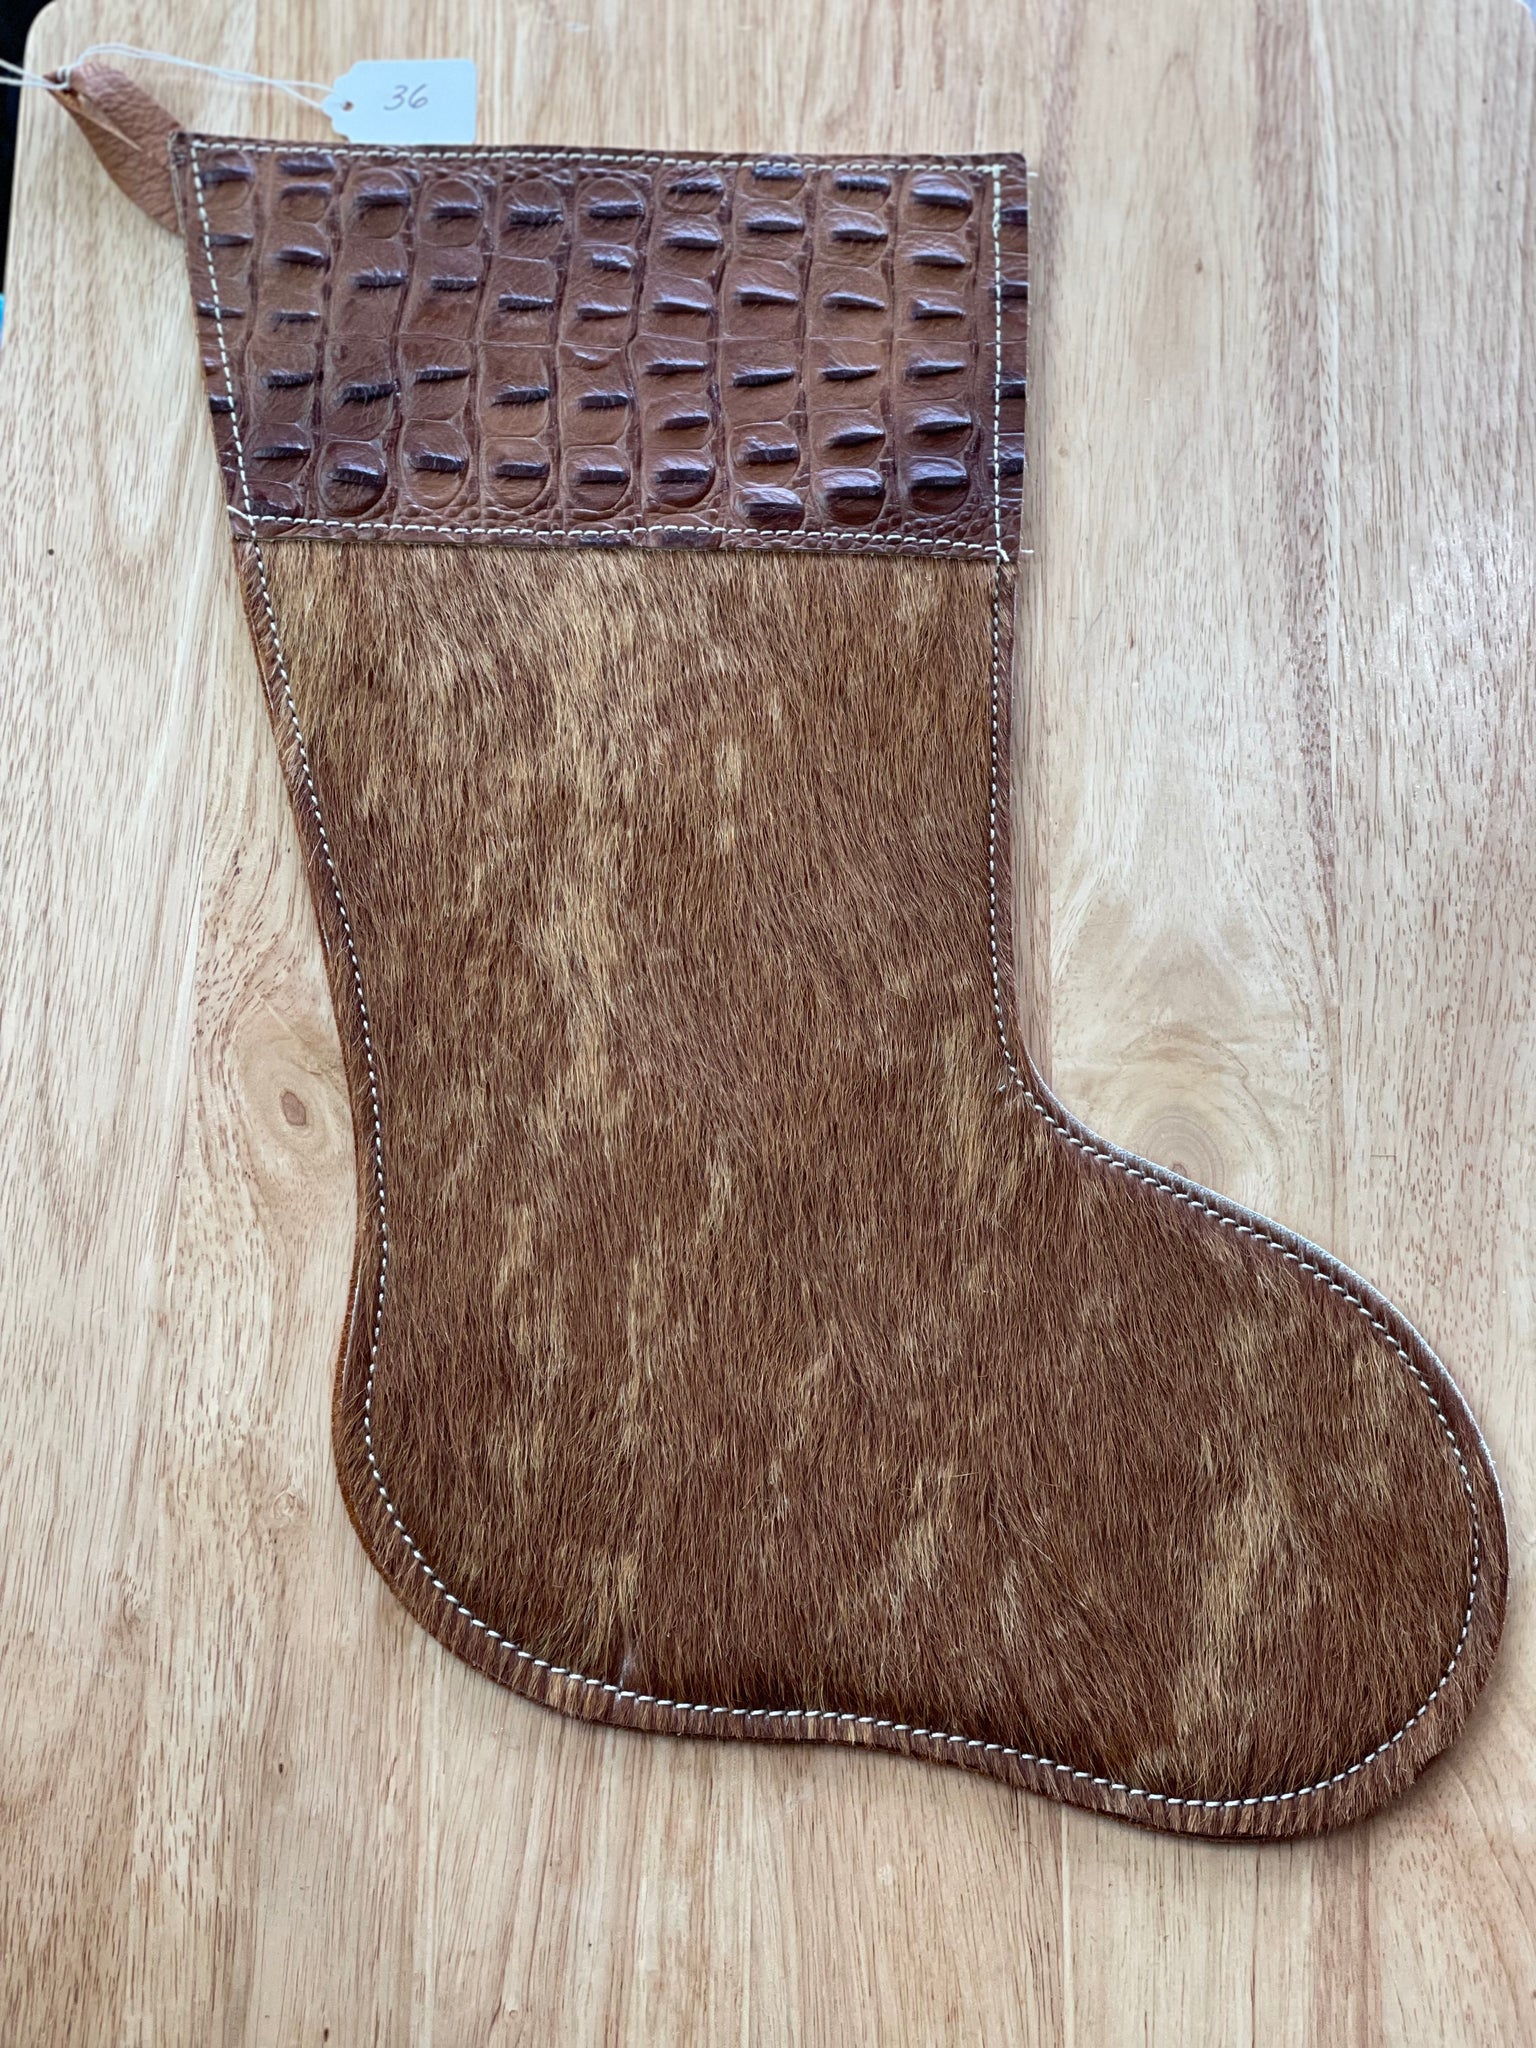 Cowhide and Leather Christmas Stocking #36